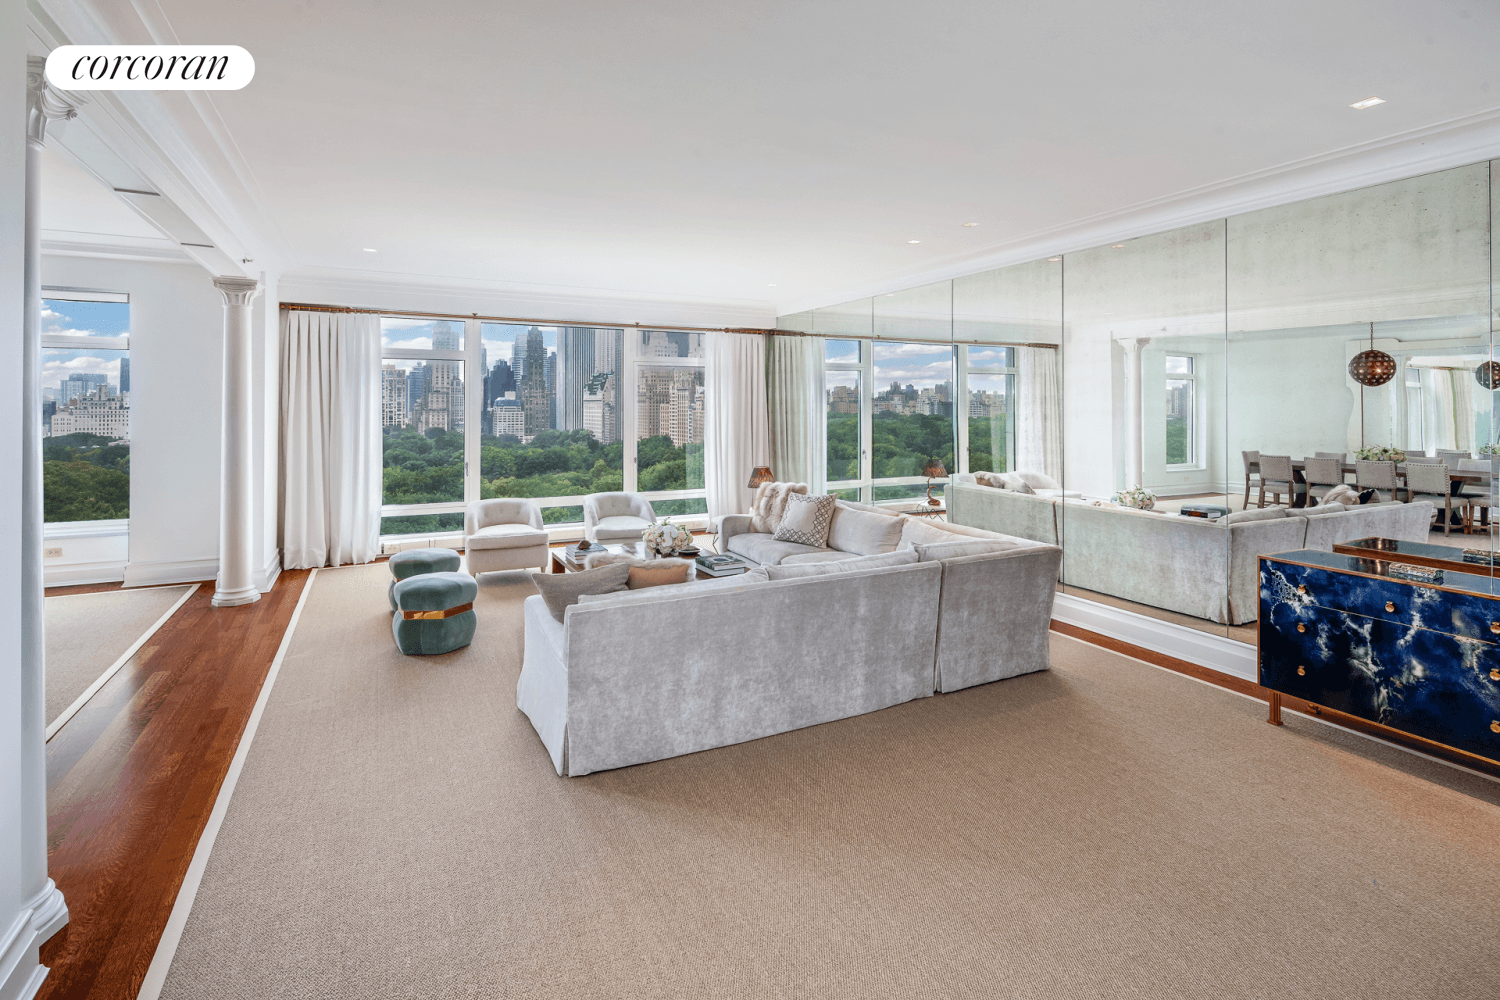 Perfectly located on the 15th Floor in the exclusive House section of 15 Central Park West, this spectacular sun flooded Robert A.